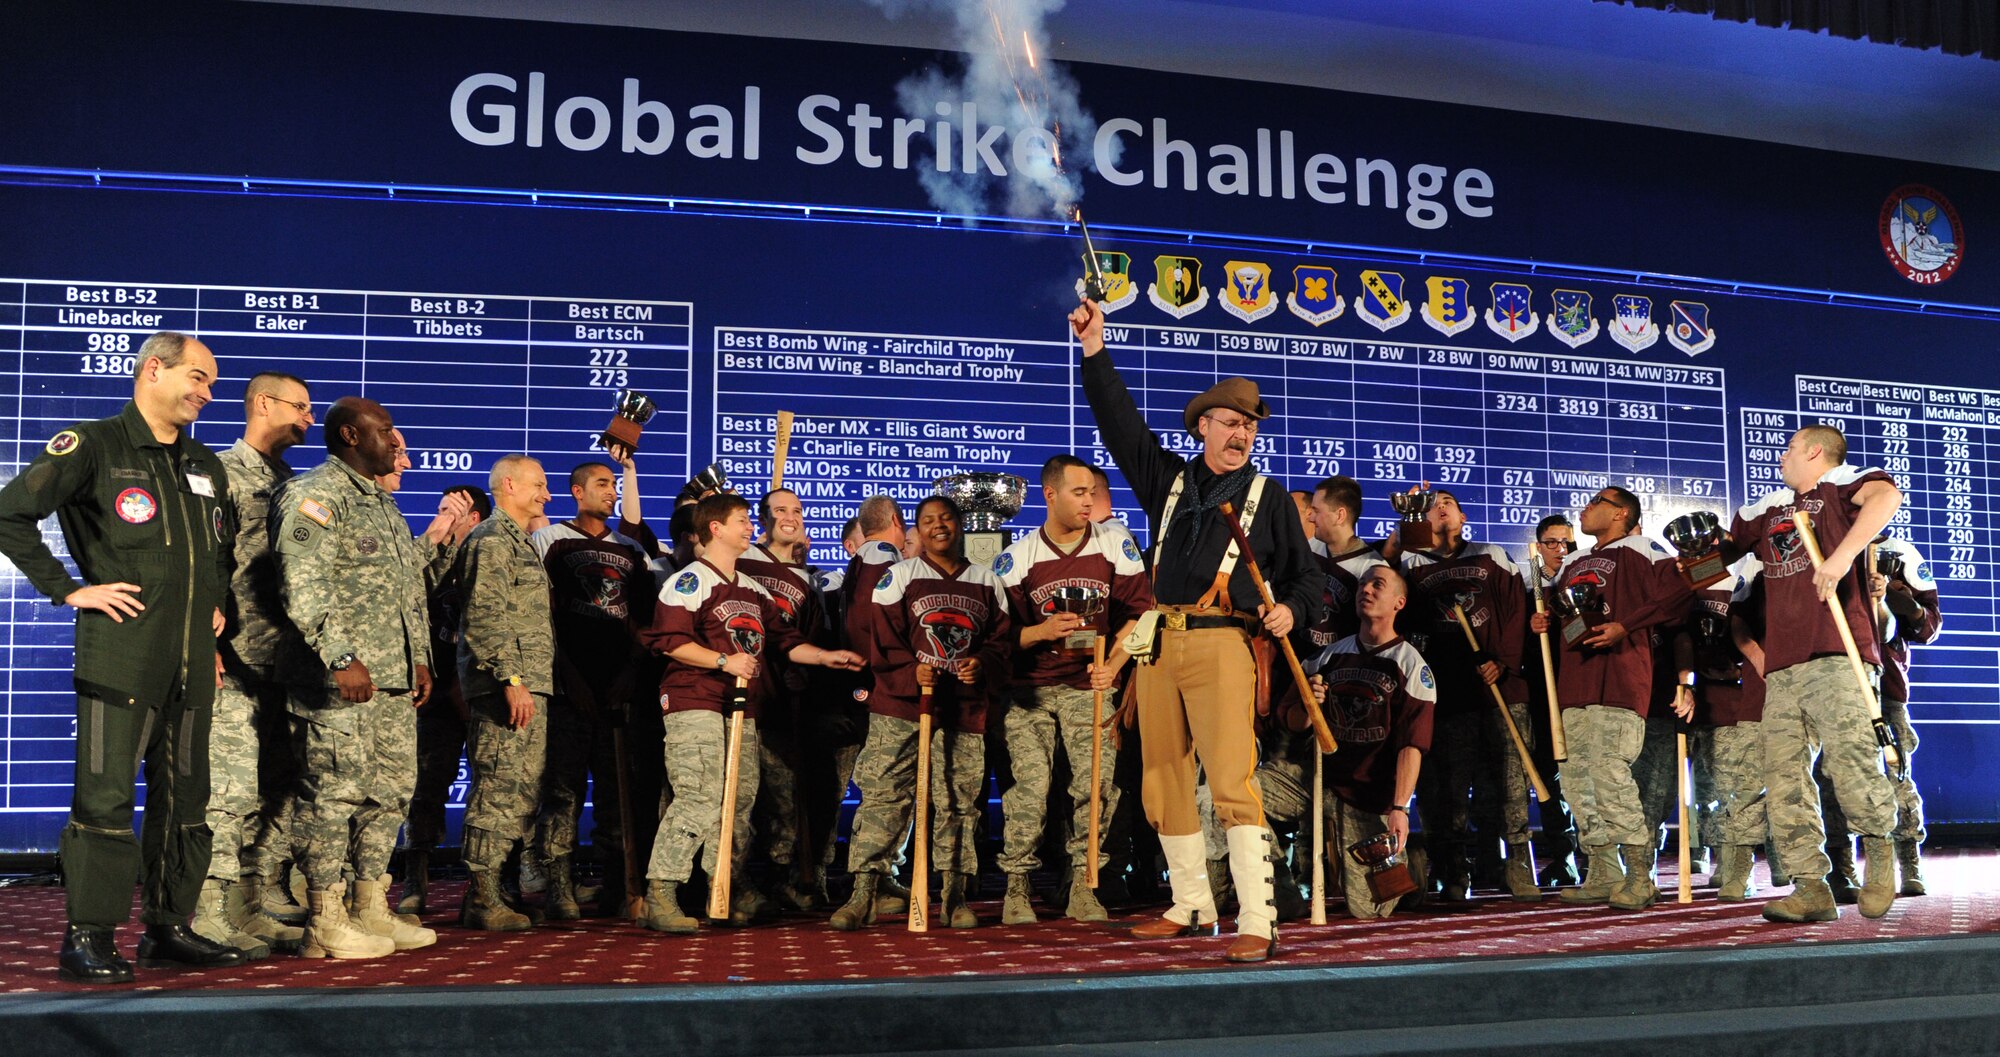 BARKSDALE AFB, La. -- Team Minot's 91st Missile Wing shined at this year's third annual Global Strike Challenge, earning the Blanchard Trophy, the nation’s top honor for an Intercontinental Ballistic Missile (ICBM) Wing, among many others. (U.S. Air Force photo/Senior Airman Brittany Y. Auld)